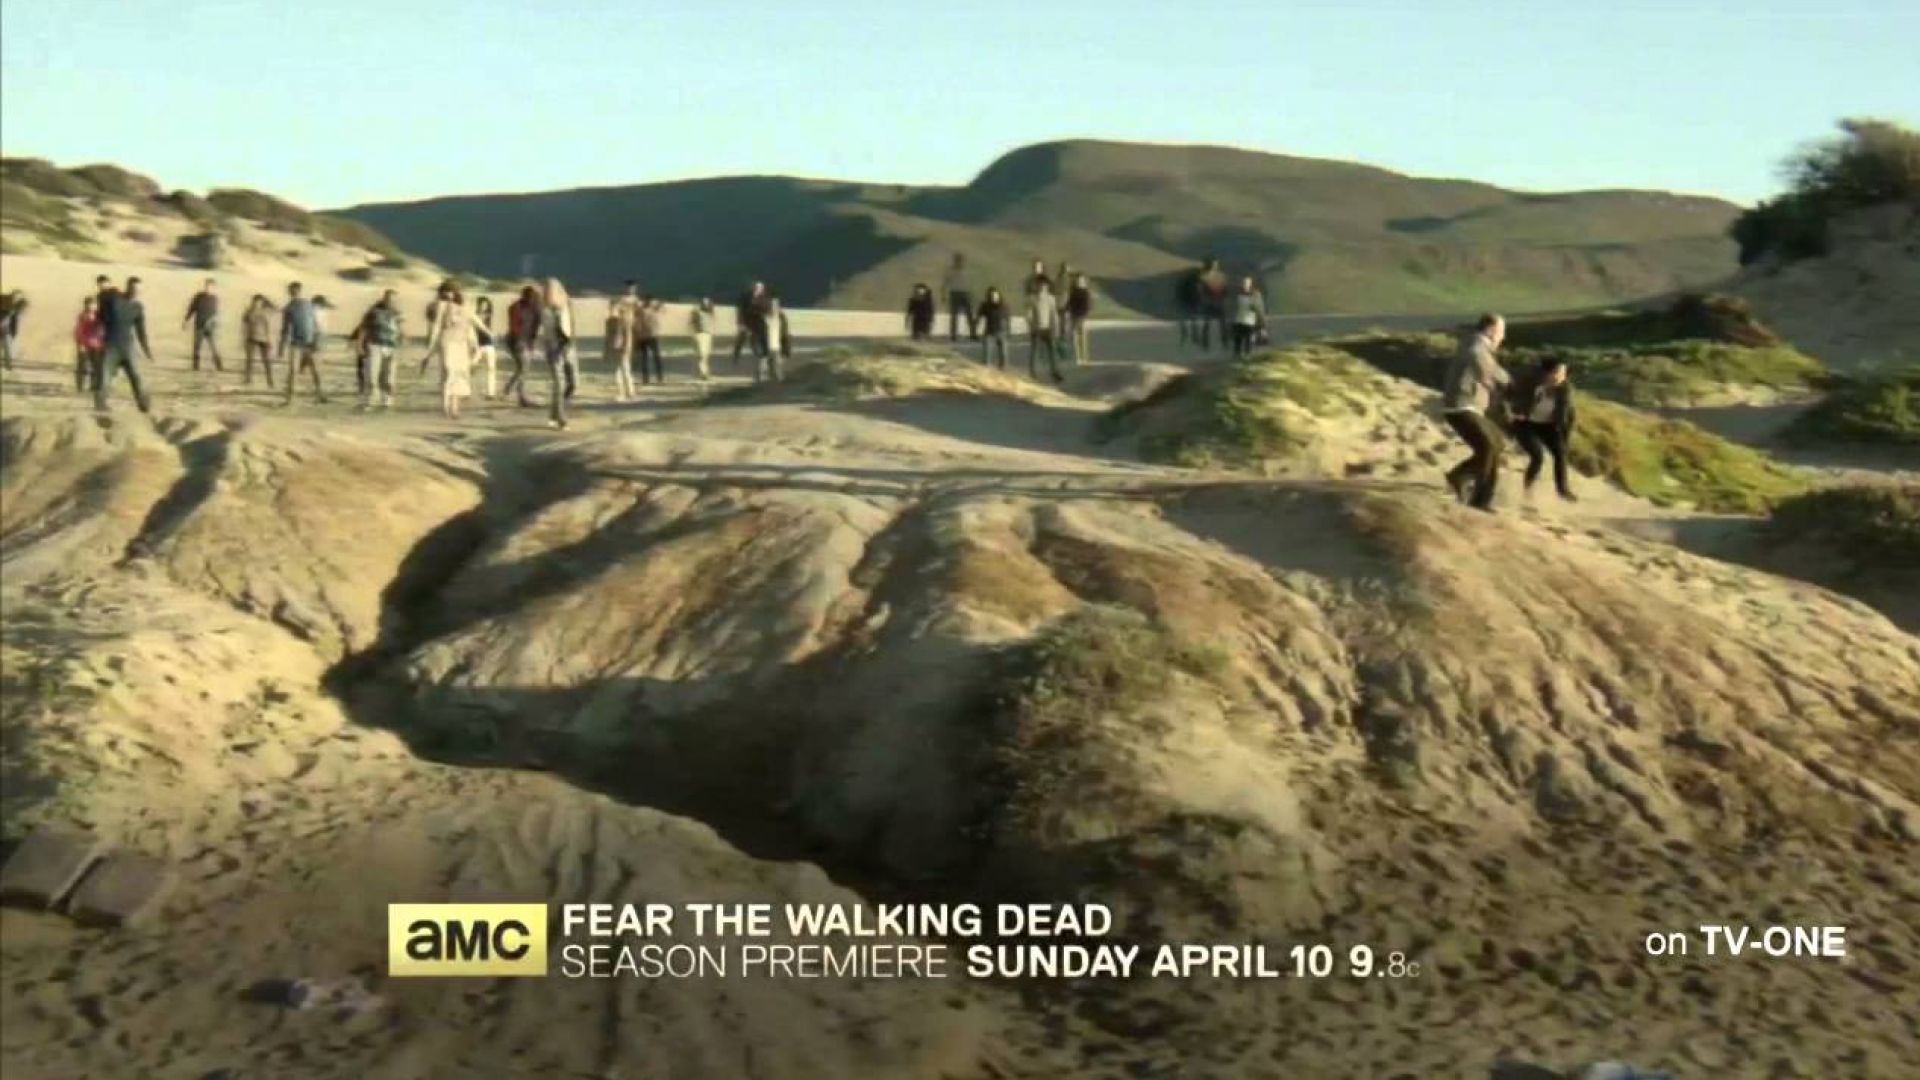 People are the real threat in the new Fear the Walking Dead 